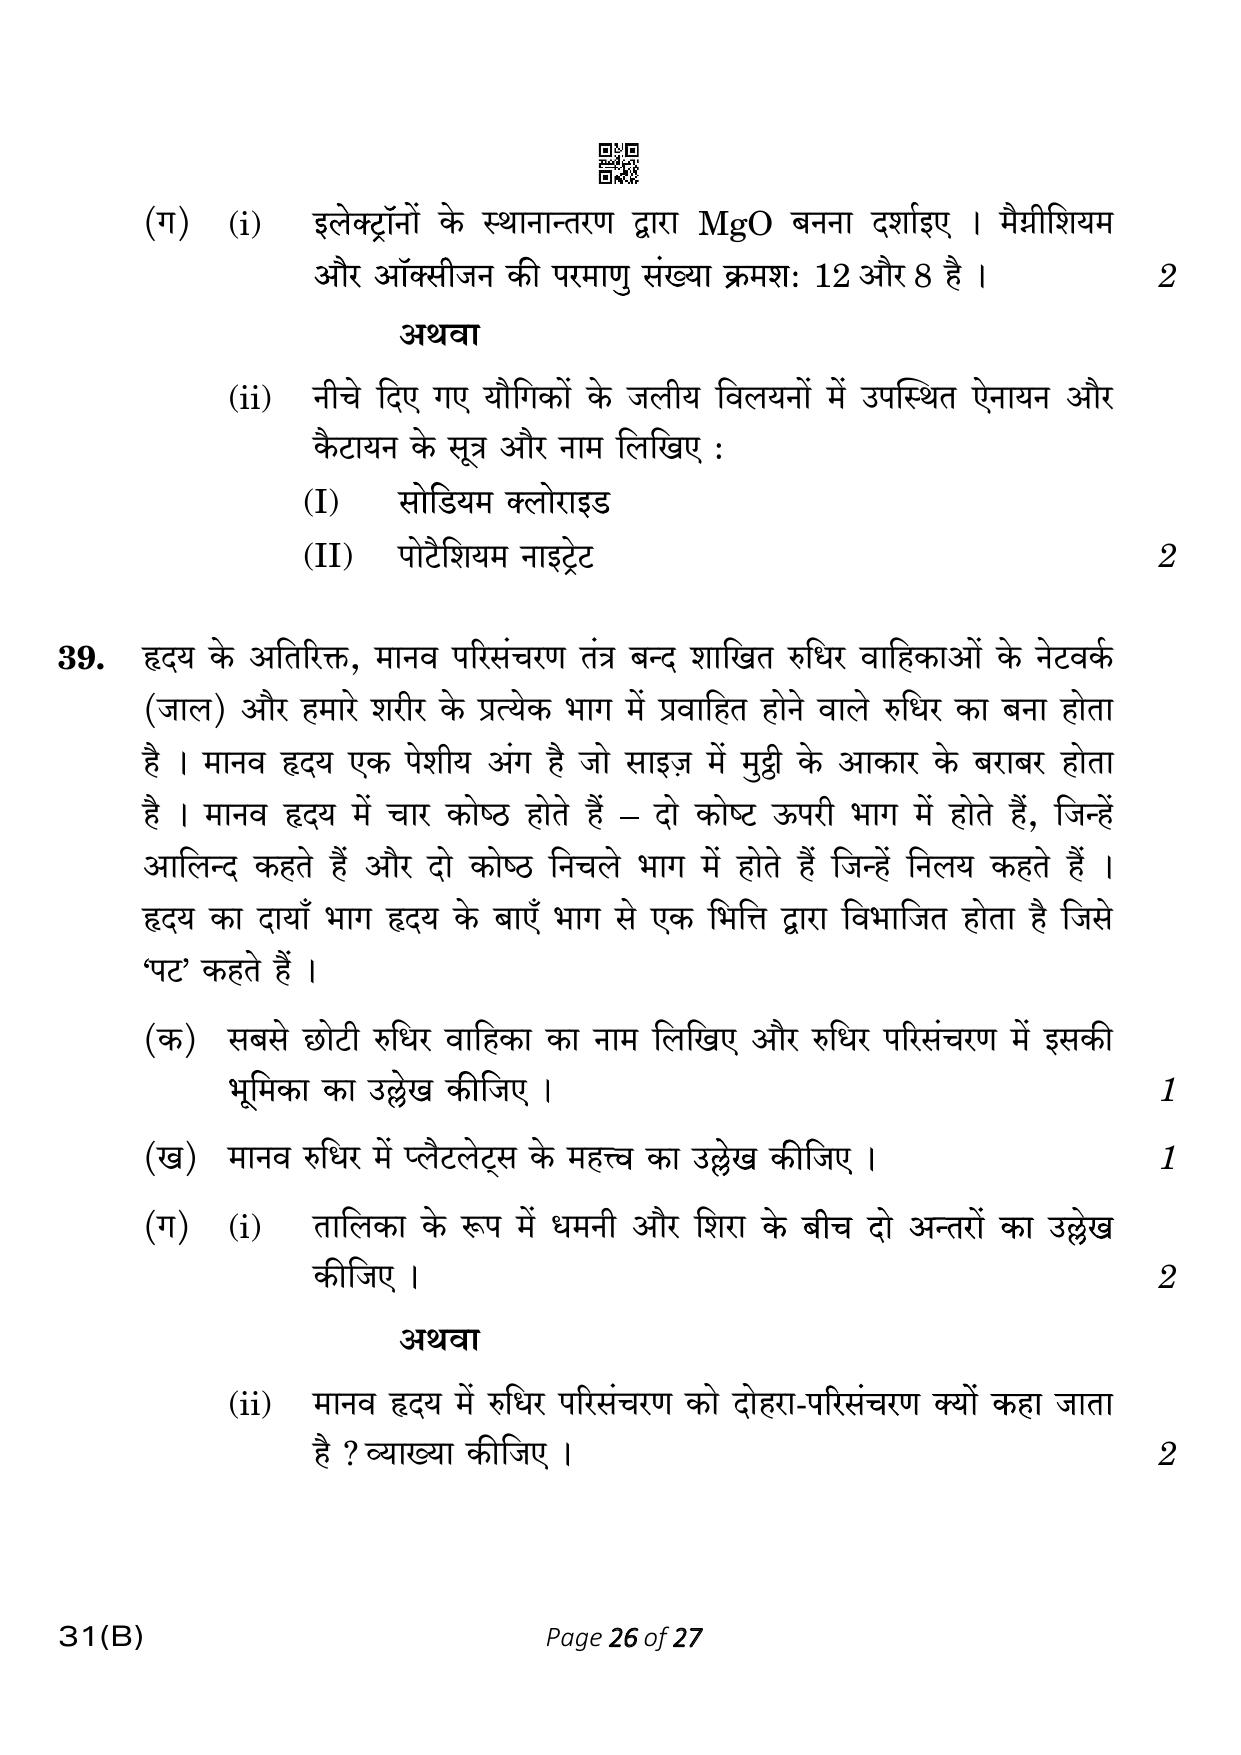 CBSE Class 10 31-B Science 2023 (Compartment) Question Paper - Page 26